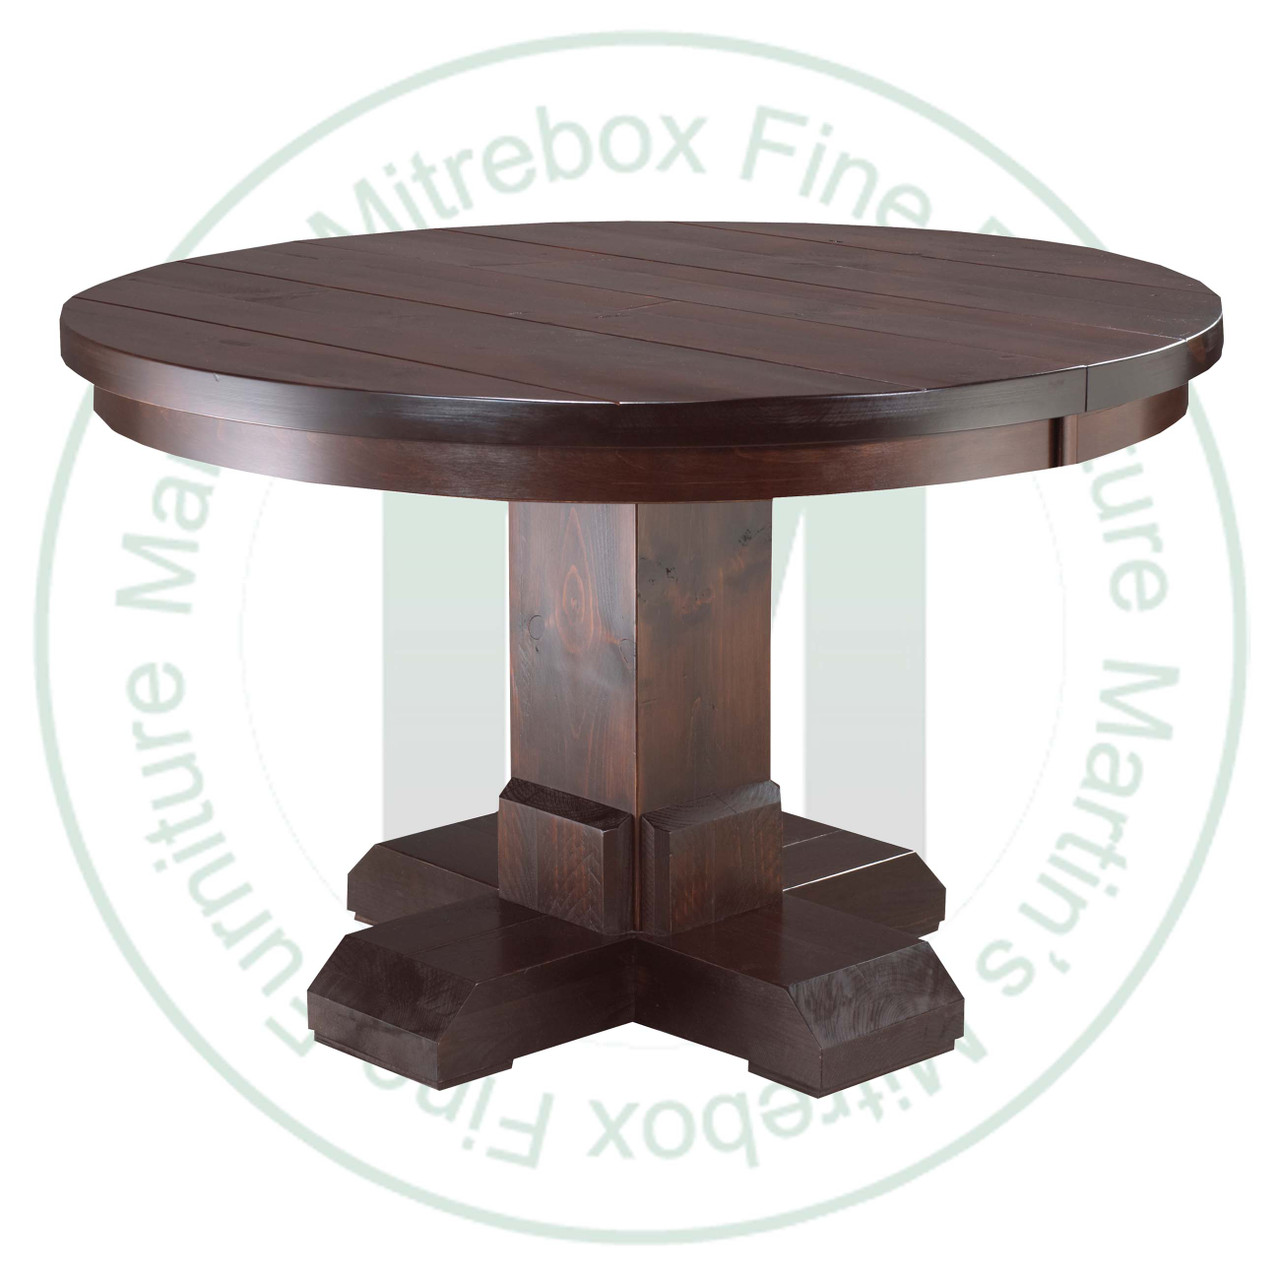 Oak Shrewsbury Single Pedestal Table 36''D x 36''W x 30''H With 1 - 12'' Leaf Table. Table Has 1.25'' Thick Top.